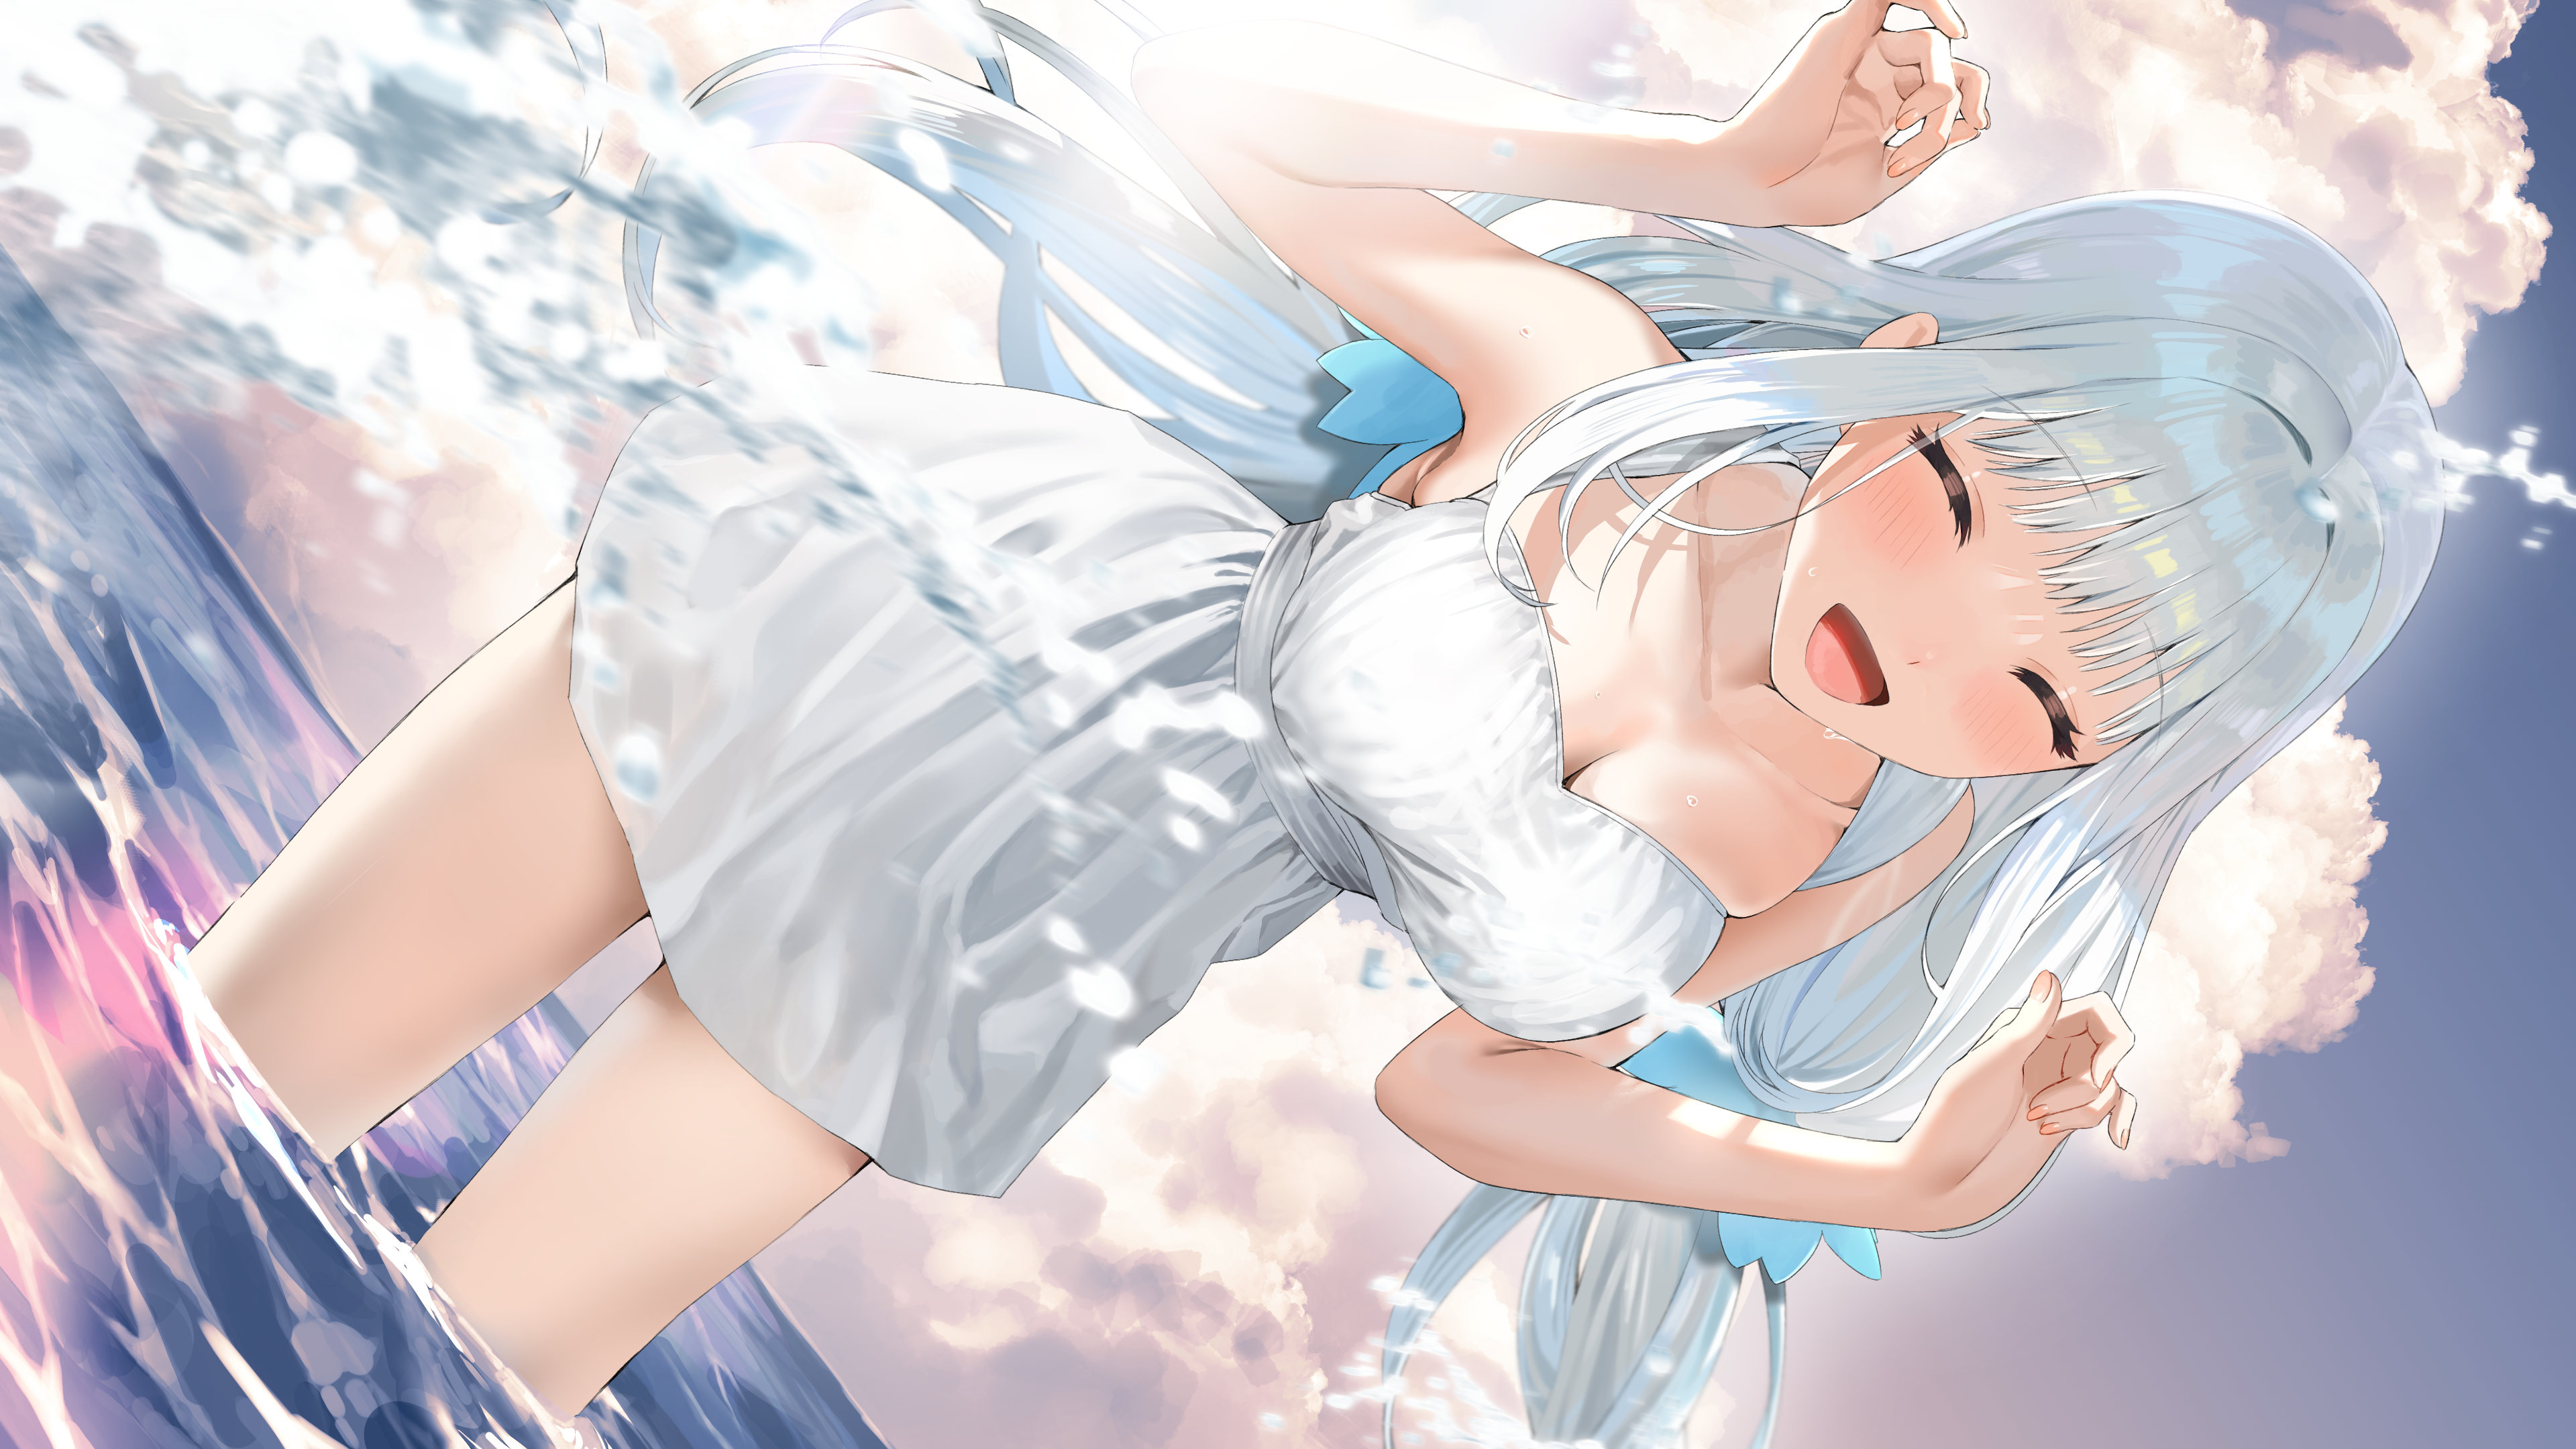 Anime 3840x2160 anime anime girls closed eyes water standing in water long hair cleavage dress clouds sky open mouth